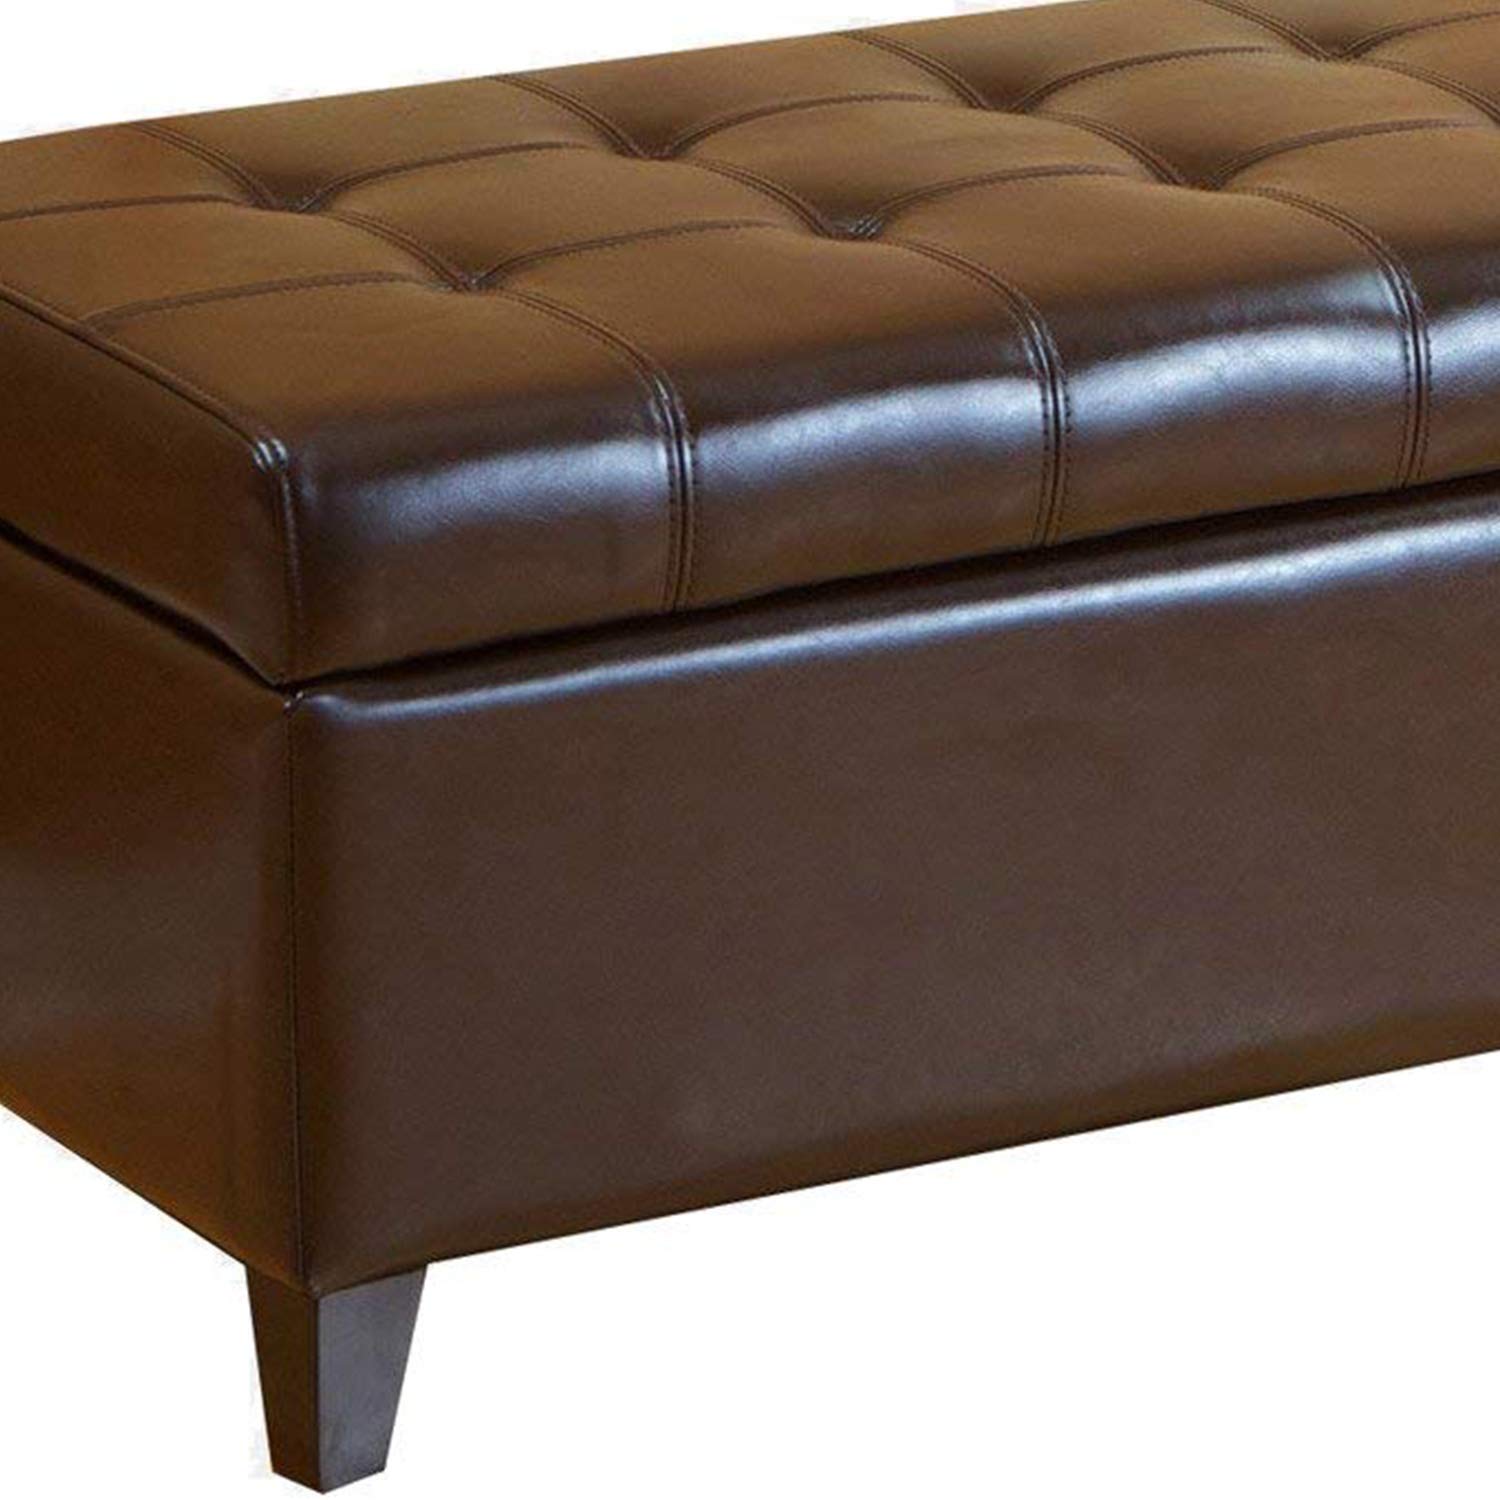 Asense 51" Long Storage Ottoman Bench Large Space, Faux Leather Rectangular Lift Top Footrest Extra Seat Footstool for Living Room Bedroom Entryway, Brown